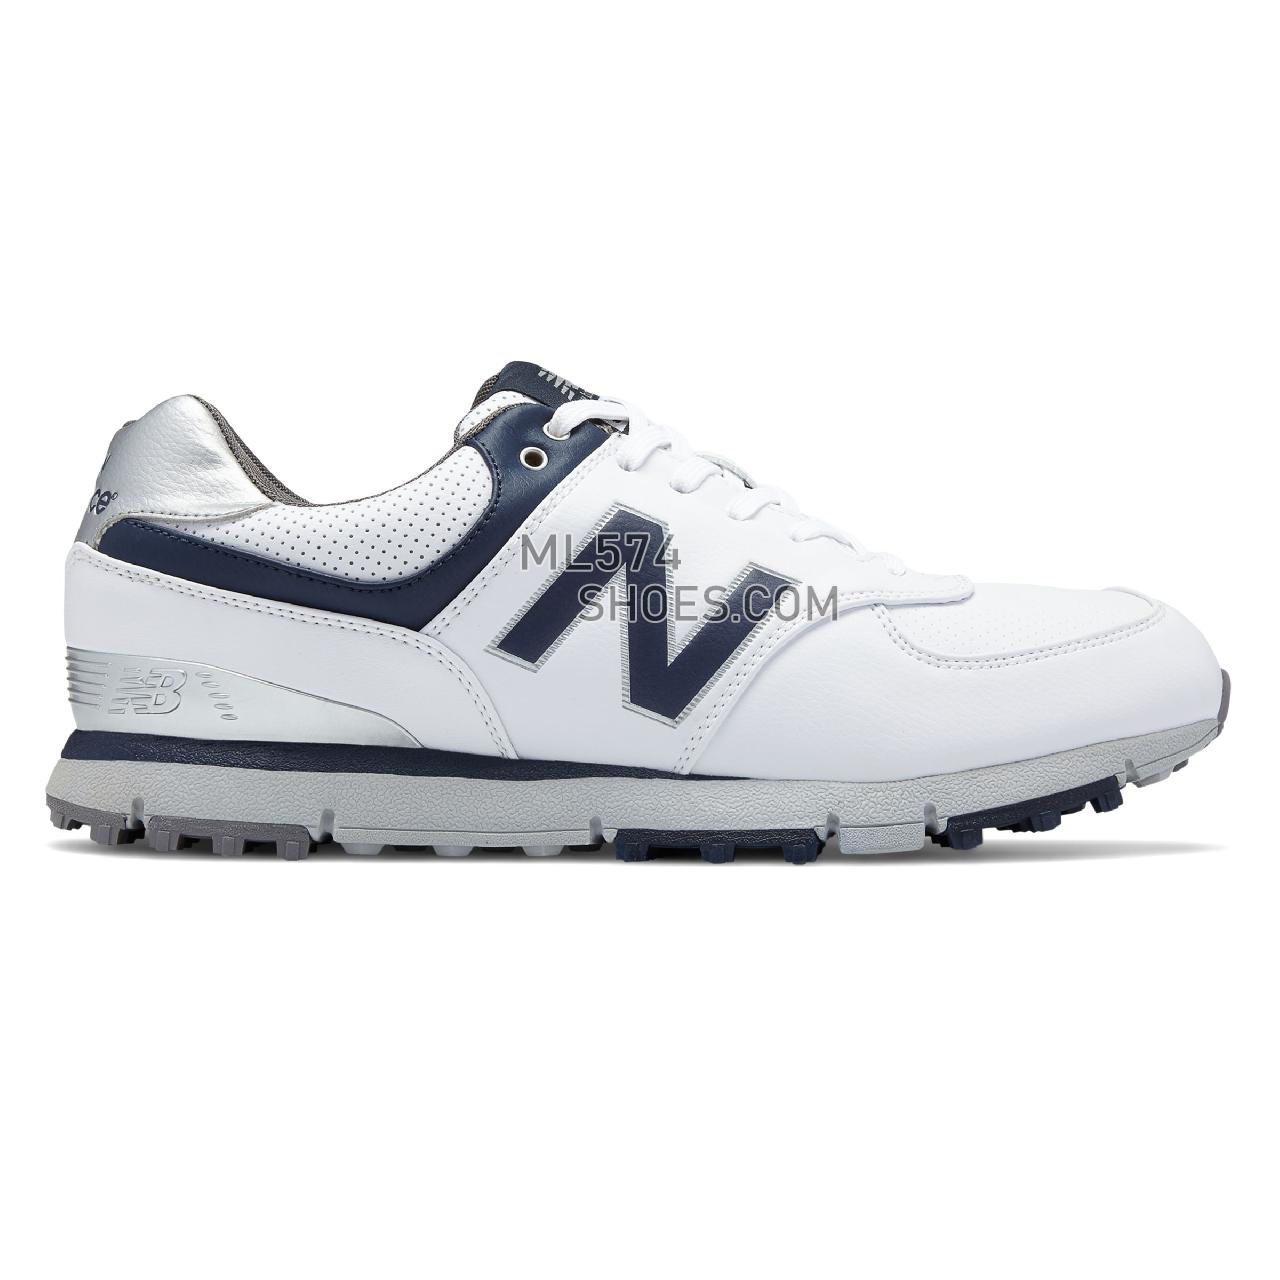 New Balance Golf Leather 574 - Men's 574 - Golf White with Navy - NBG574WN